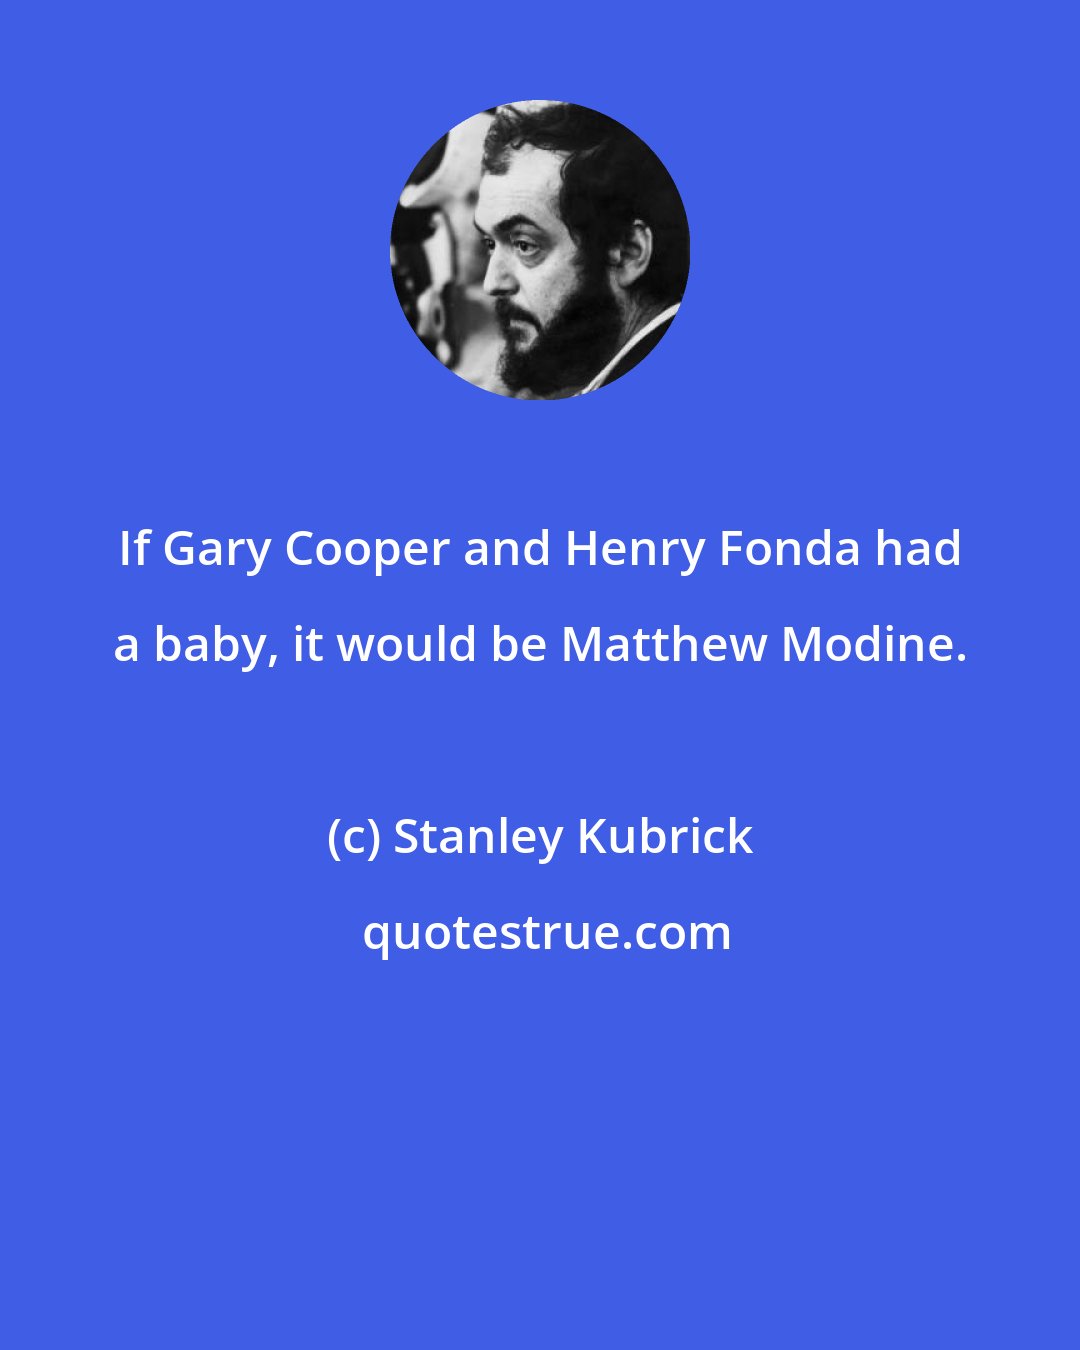 Stanley Kubrick: If Gary Cooper and Henry Fonda had a baby, it would be Matthew Modine.